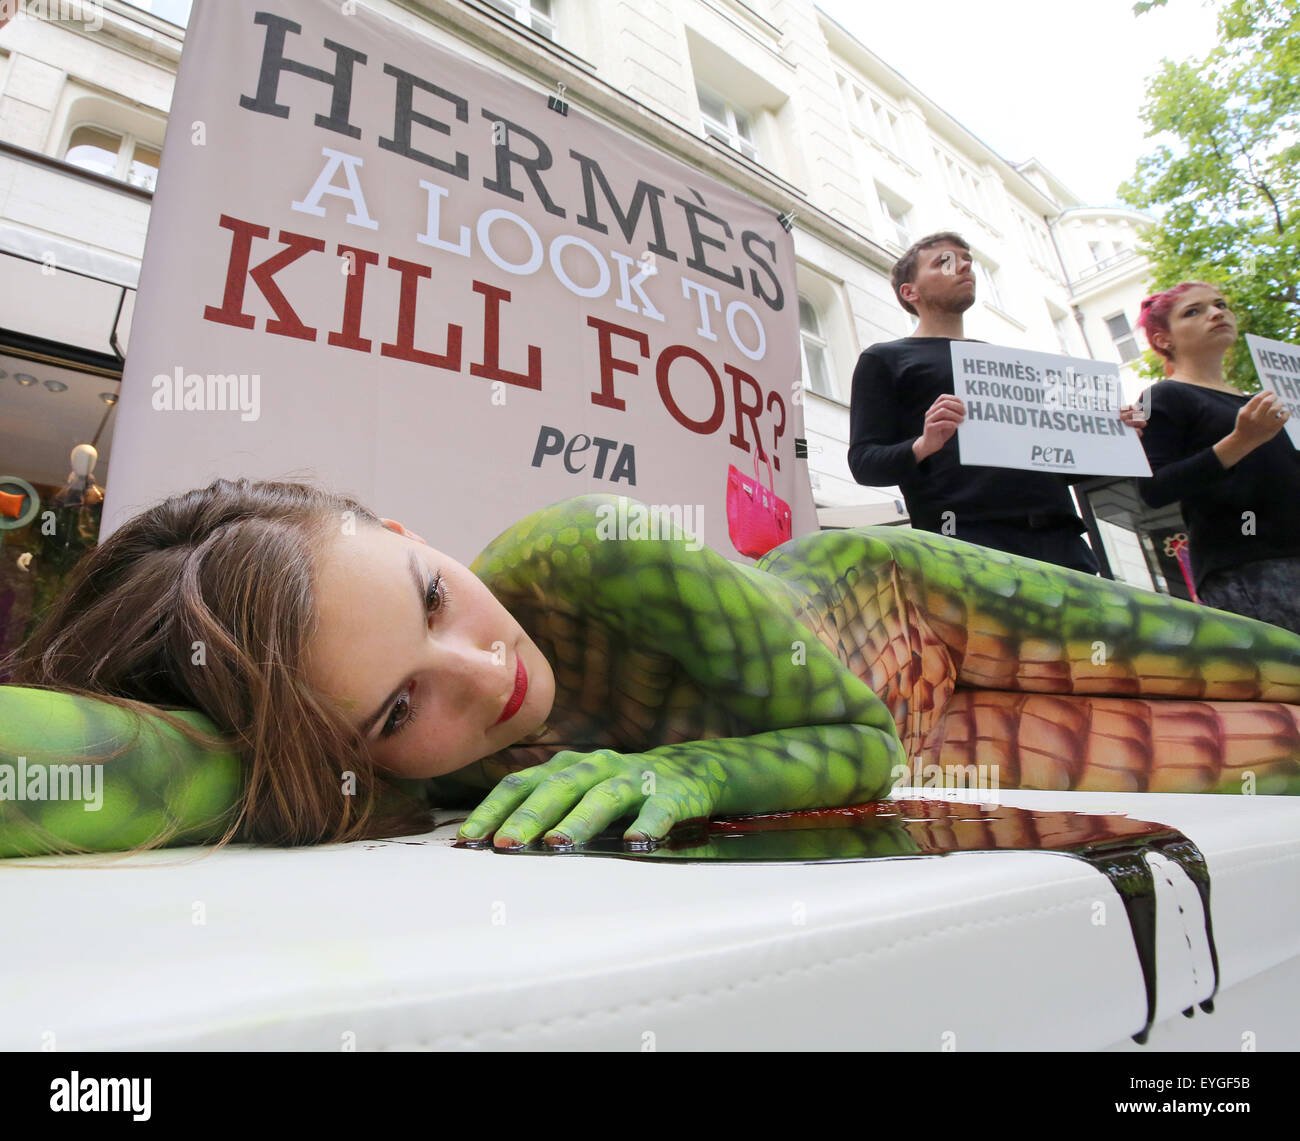 Berlin, Germany. 29th July, 2015. Members of the animal rights group Peta  protest in front of a shop of the brand Hermes against the killing of  crocodiles for luxury leather bags in